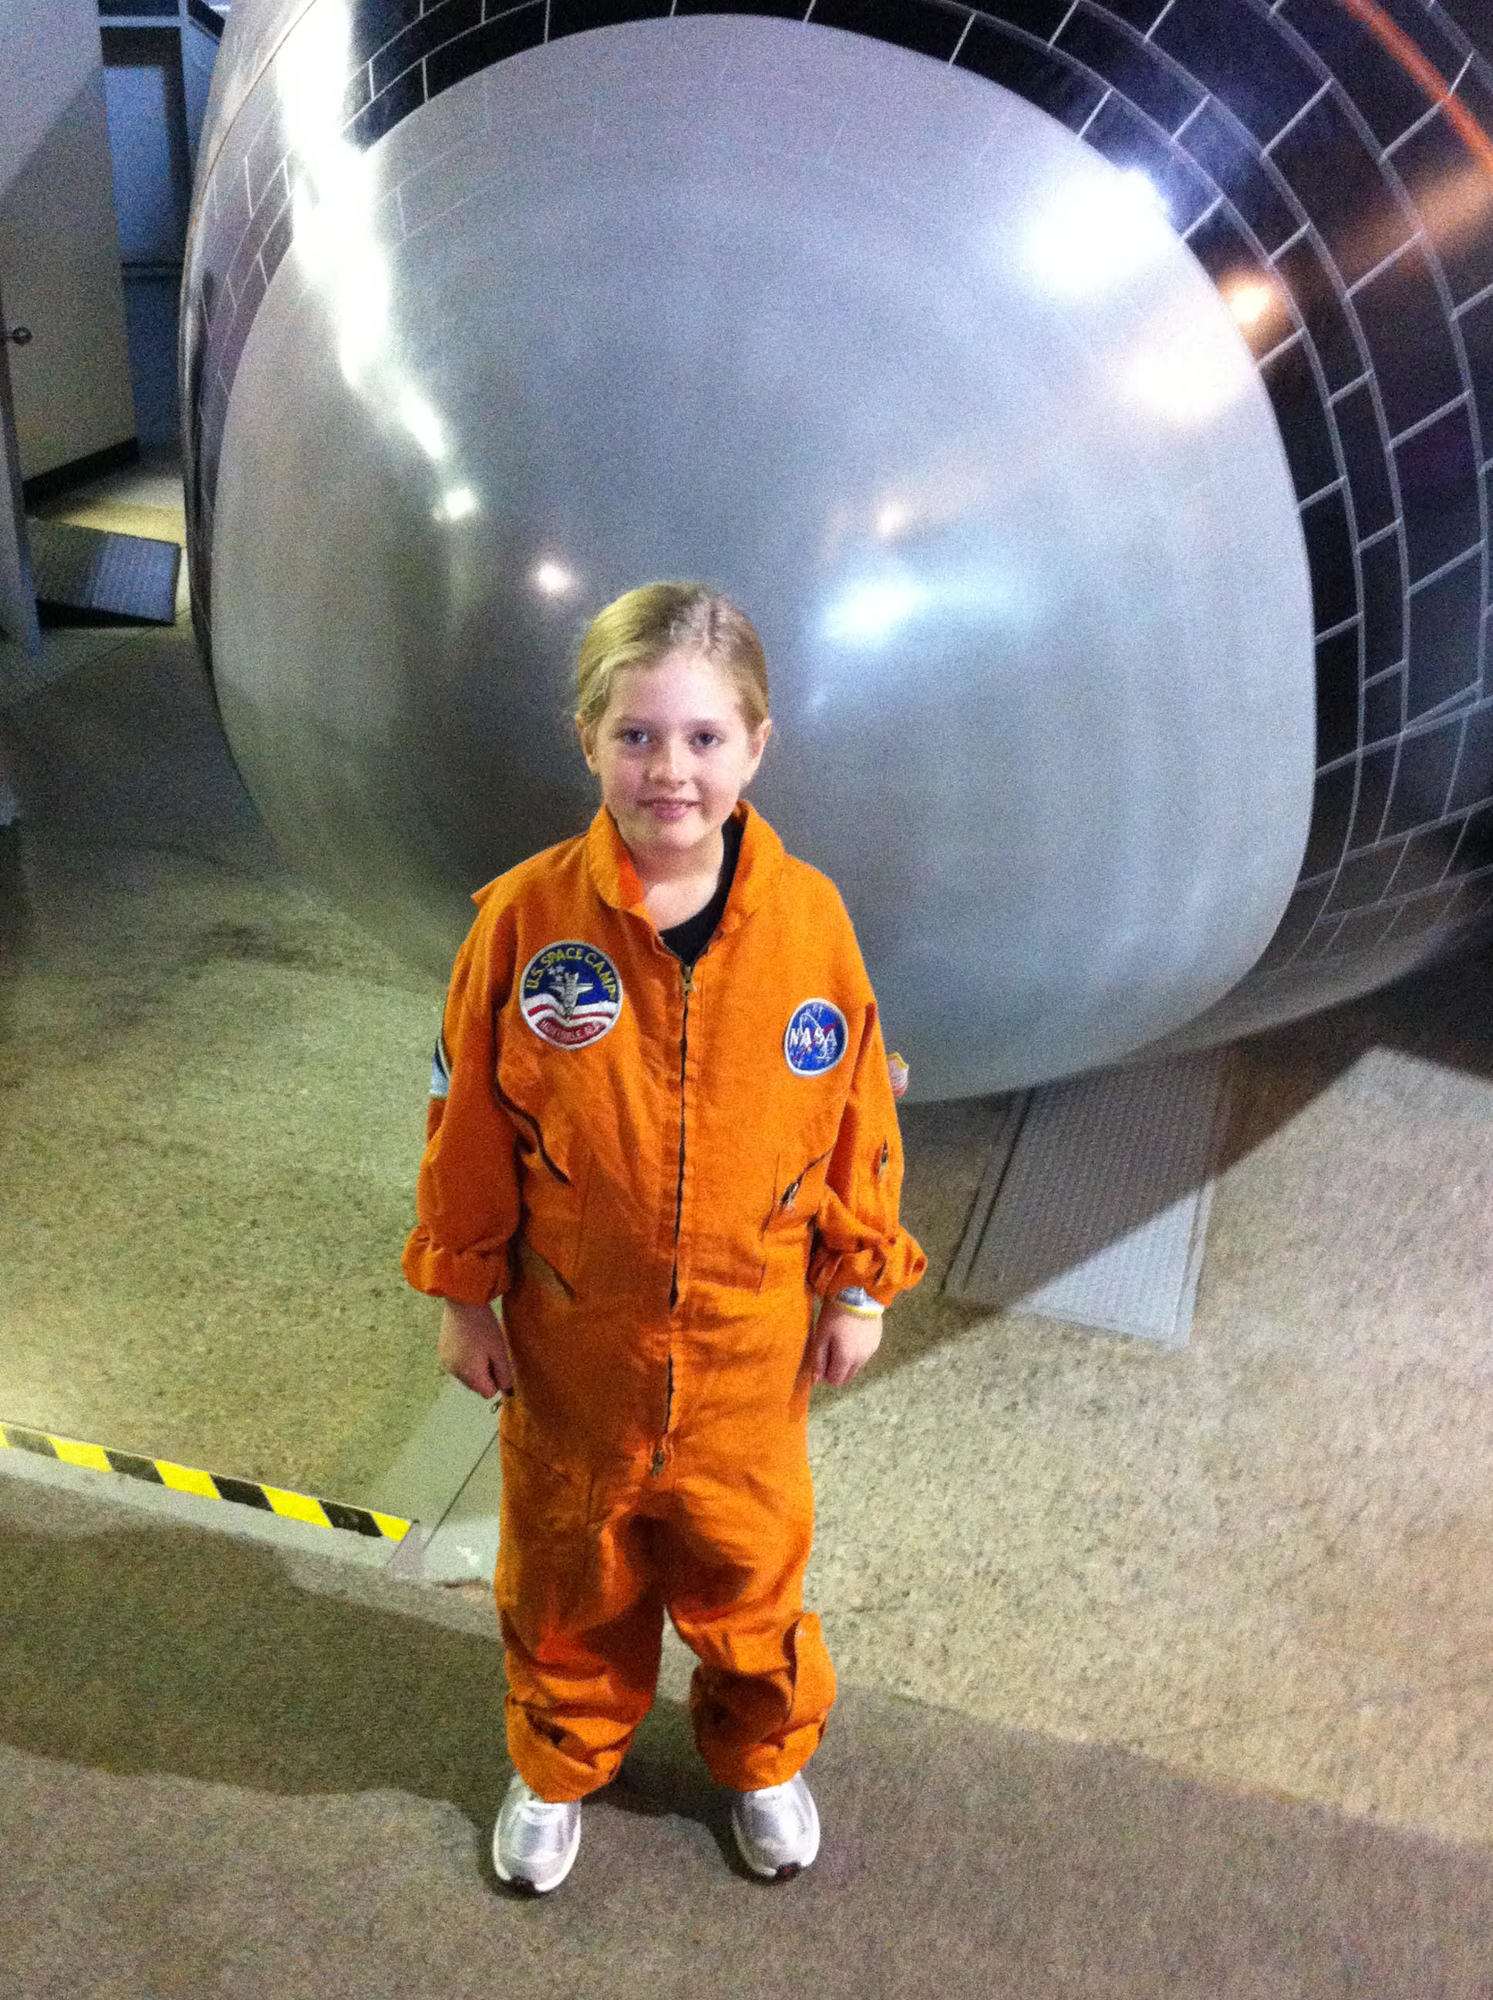 When she was 7, Kathleen Cravens attended Space Camp in Huntsville, Alabama. (Courtesy photo)